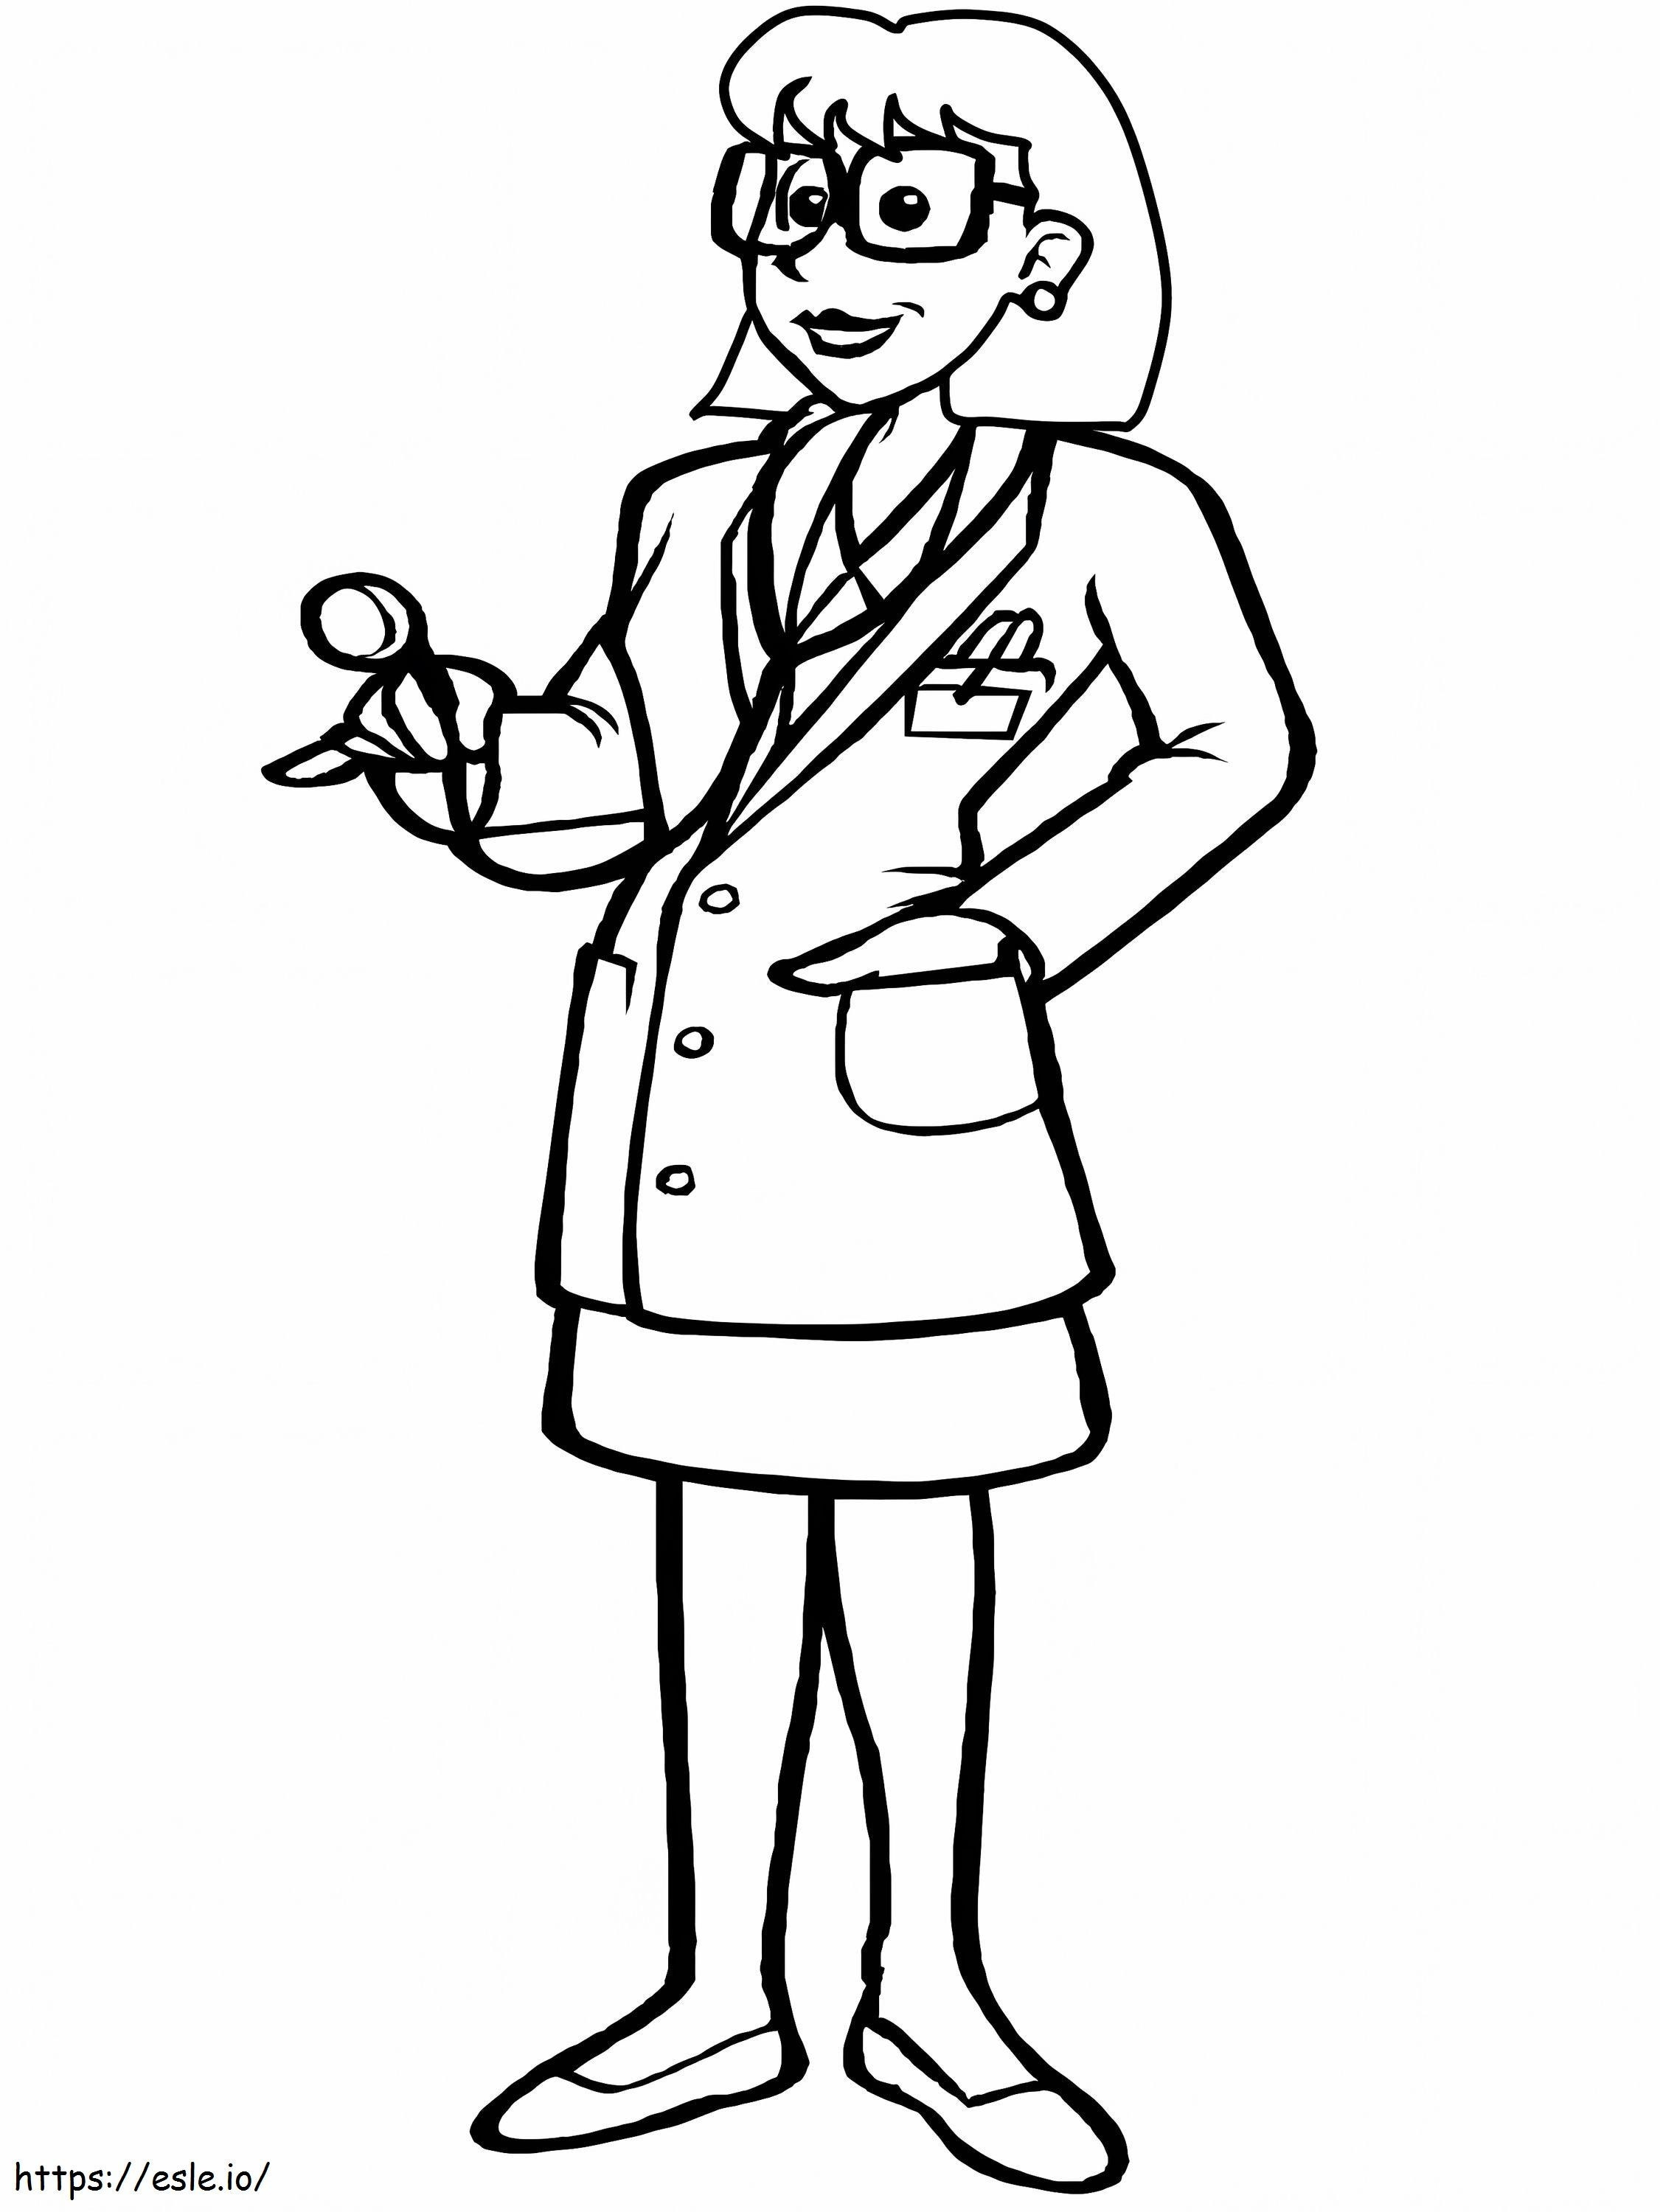 Mrs Doctor coloring page